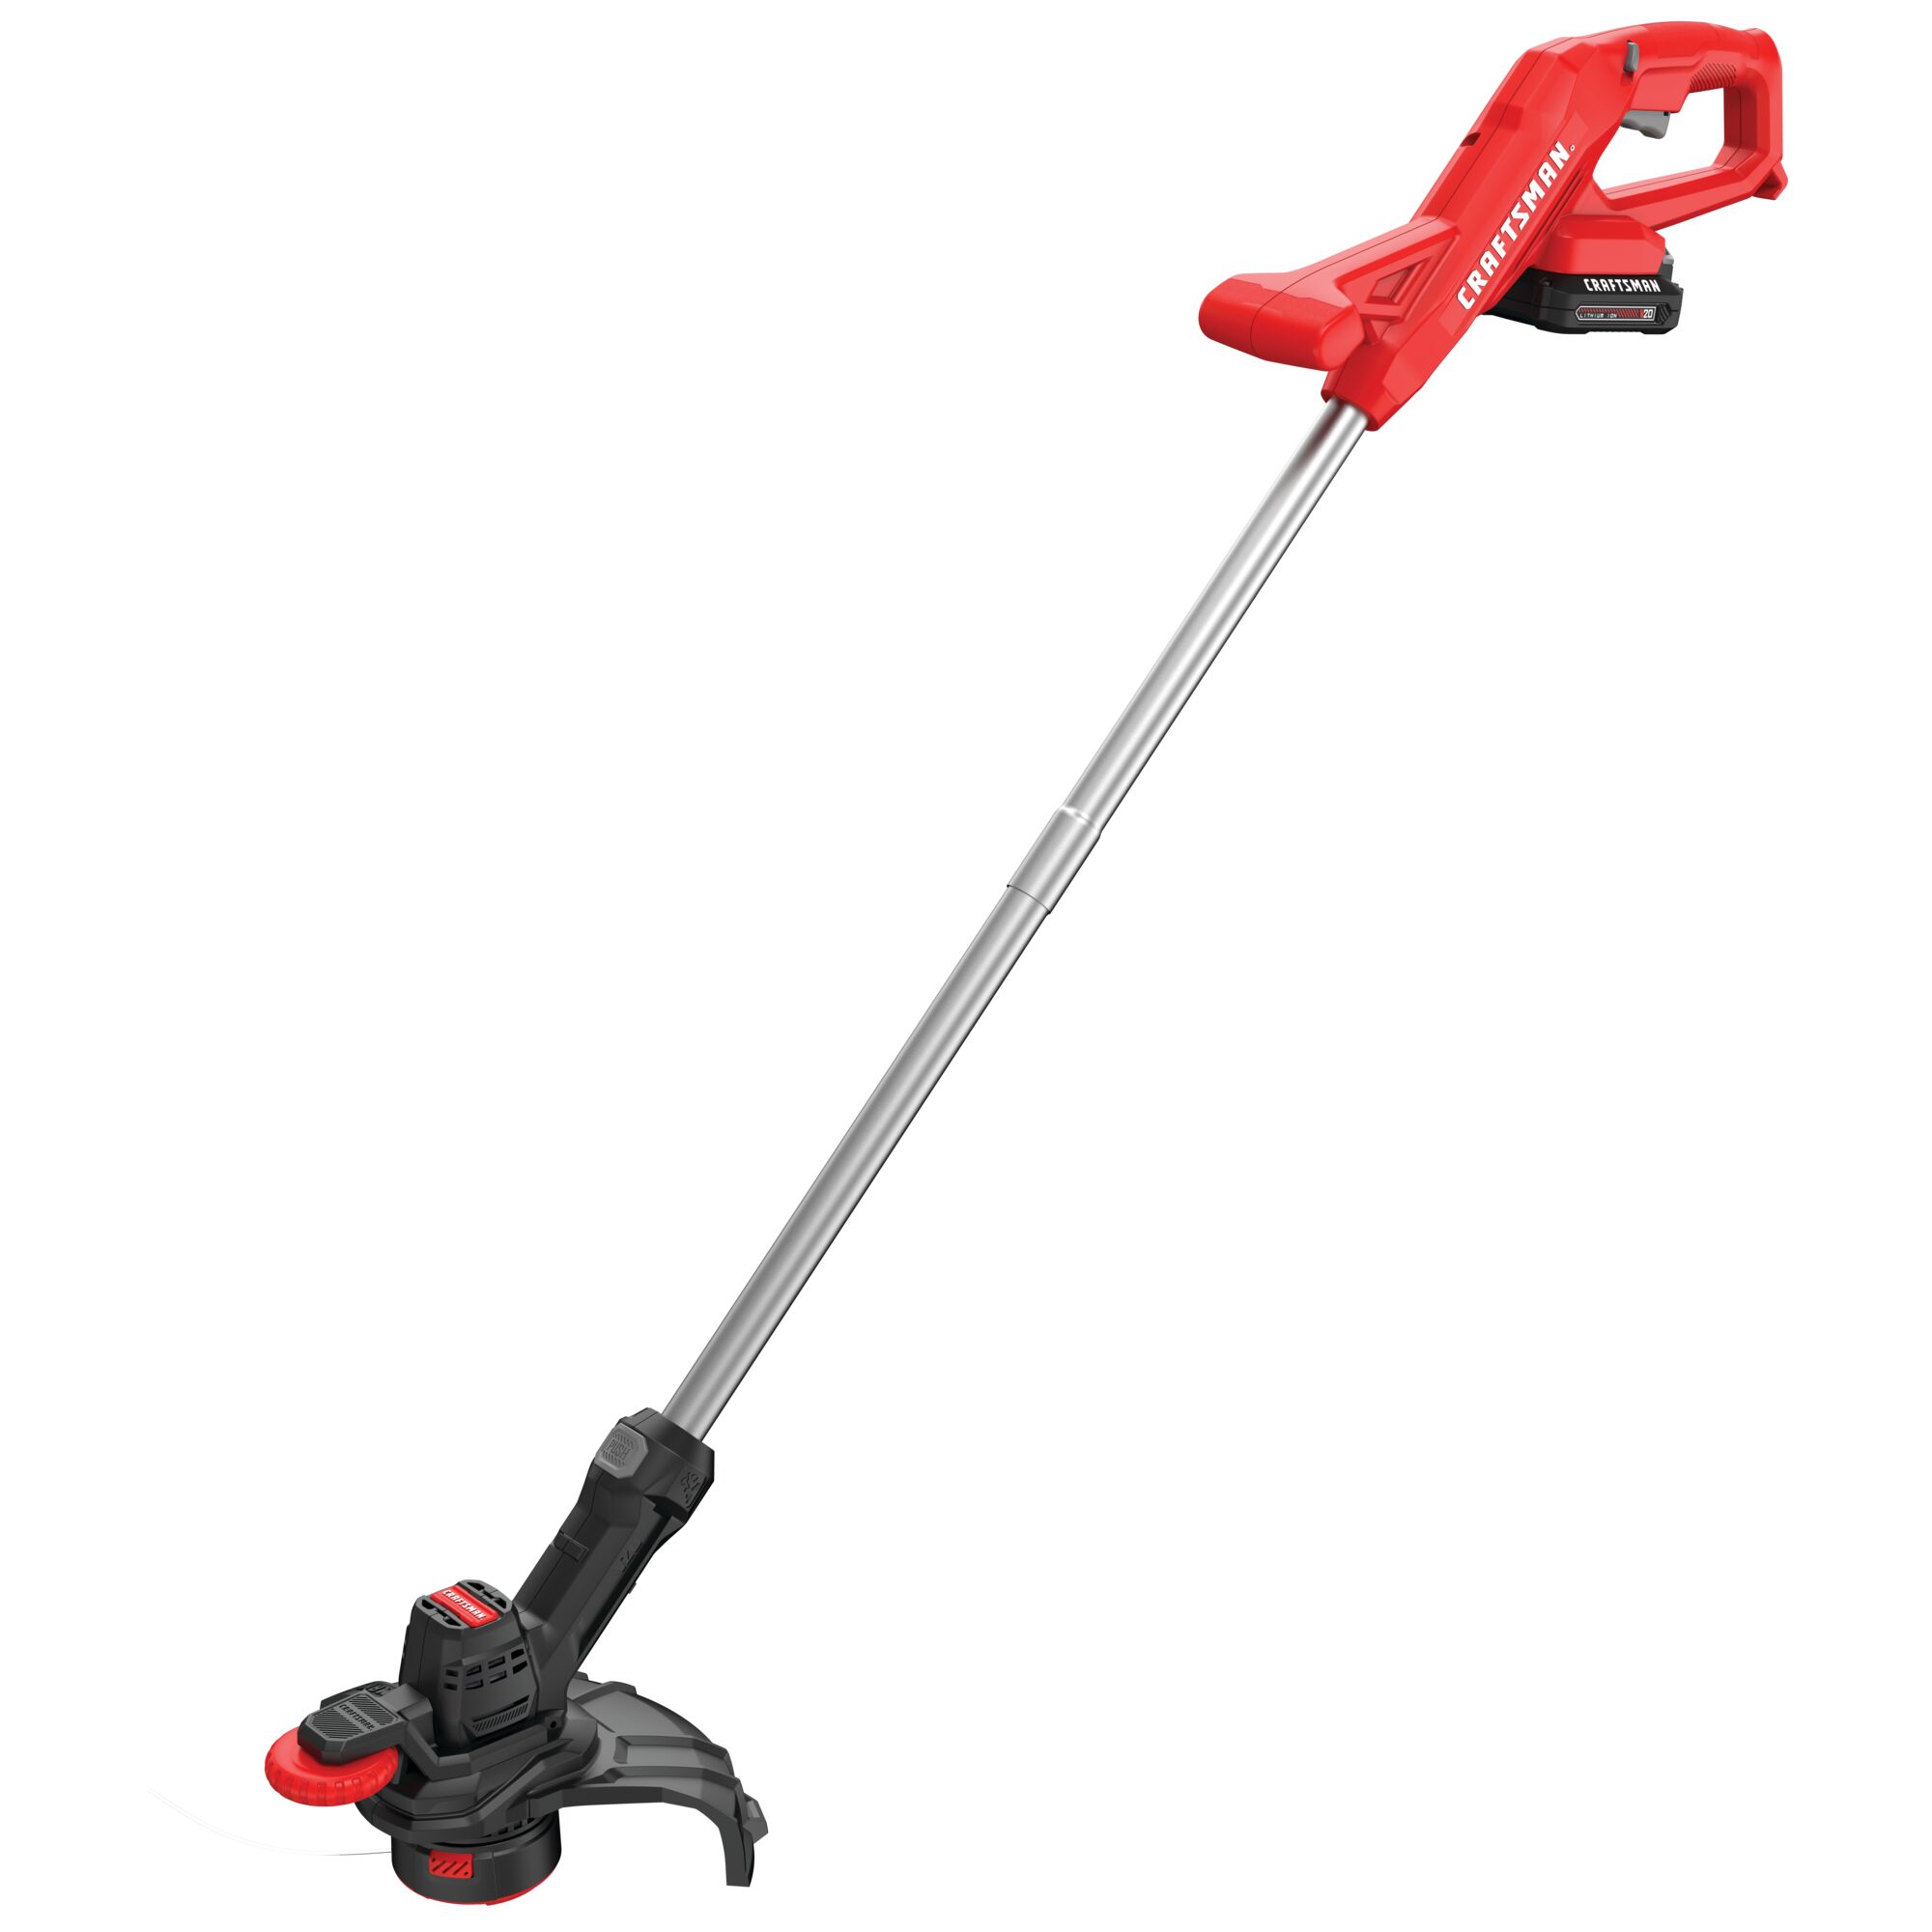 Right profile of 20 volt cordless 10 inch weedwacker string trimmer and edger.